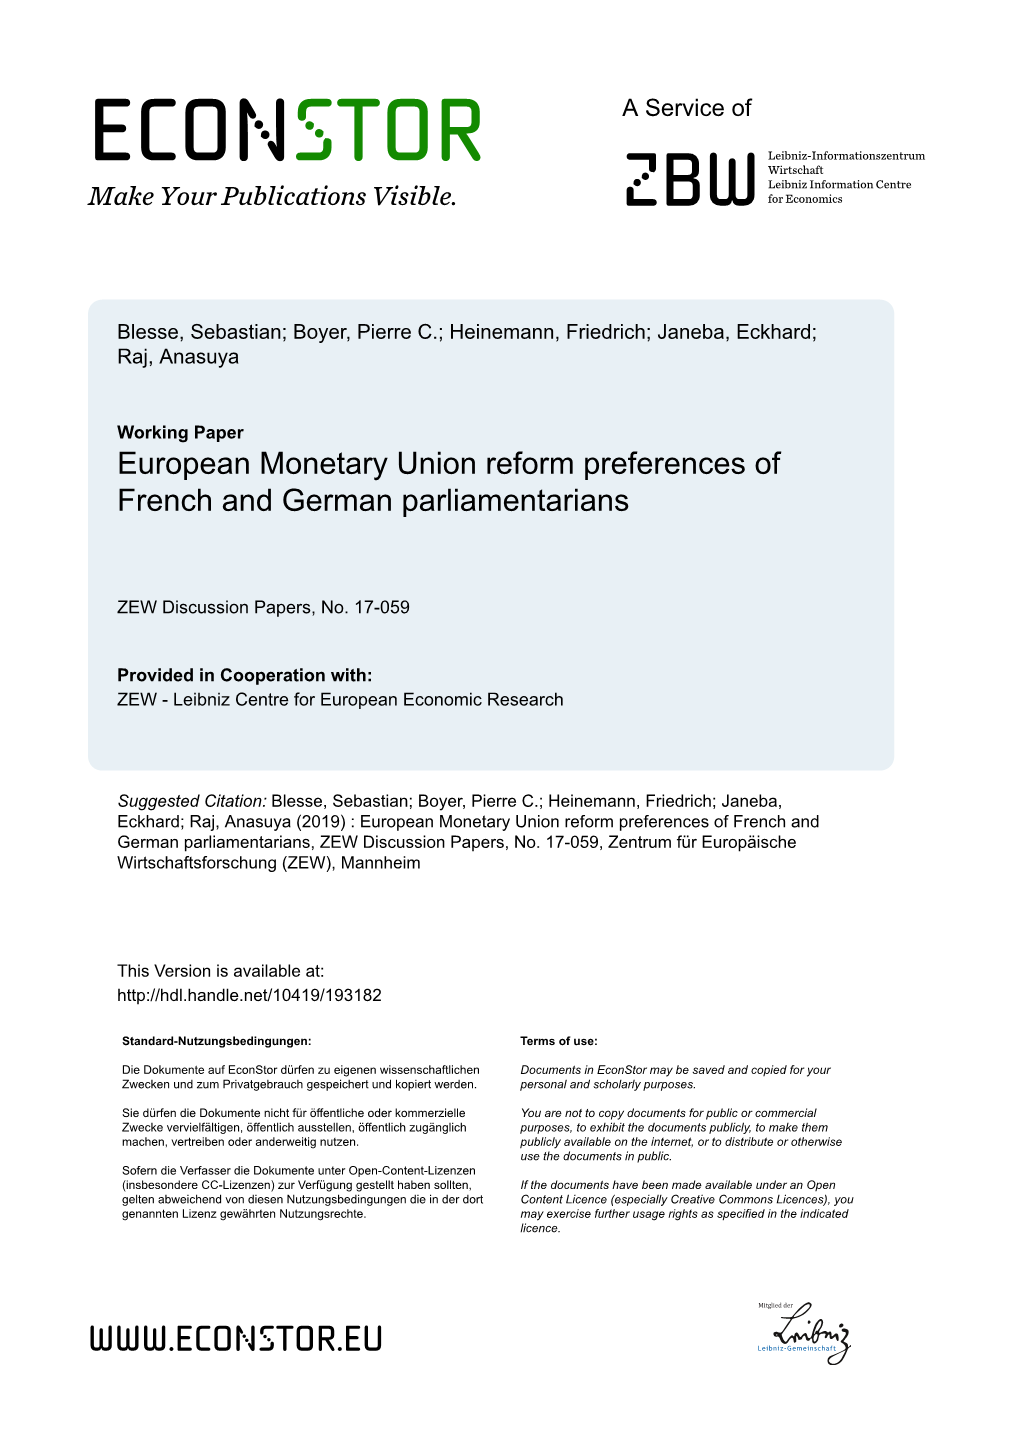 European Monetary Union Reform Preferences of French and German Parliamentarians